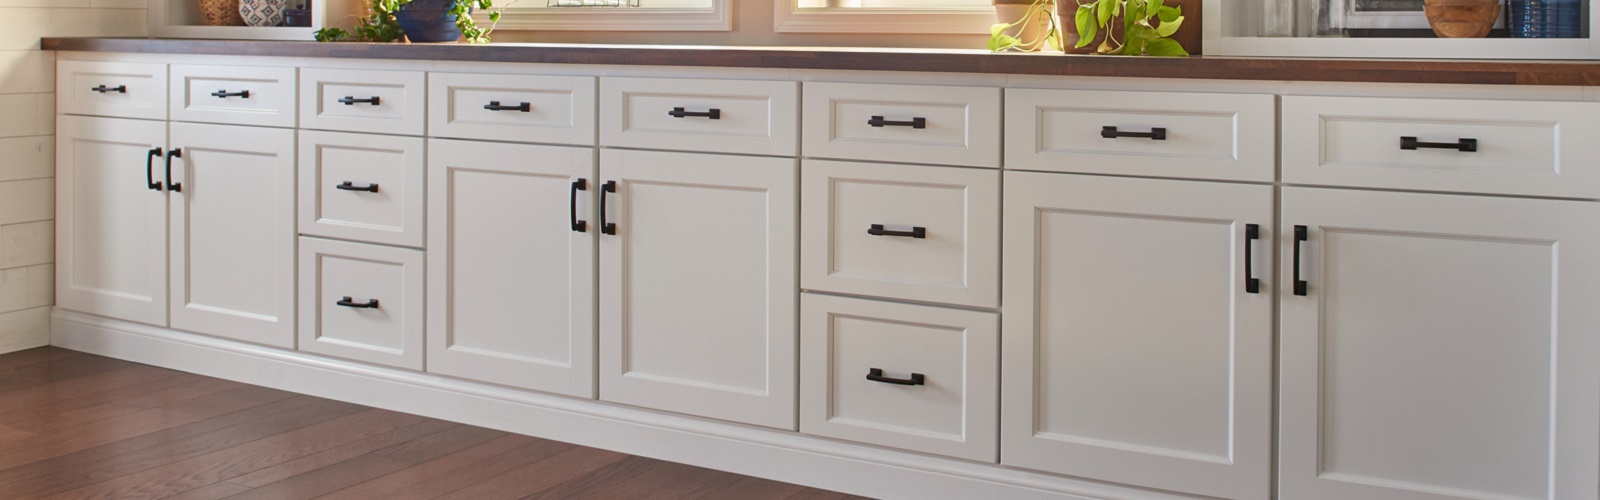 Drawer Boxes - Kitchen Cabinet Doors